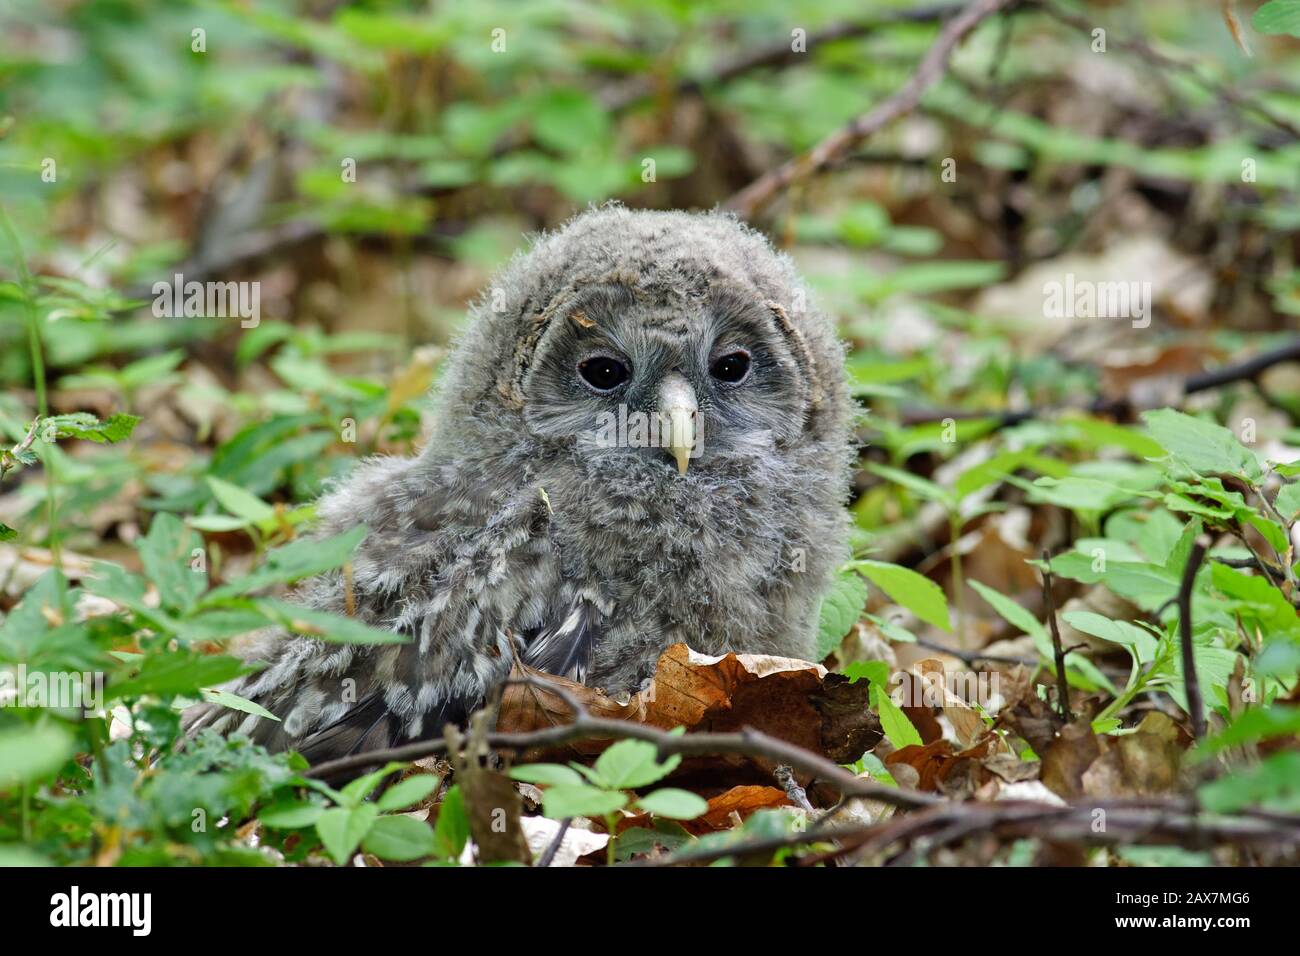 The Ural owl (Strix uralensis) is a fairly large nocturnal owl. It is a member of the true owl family, Strigidae. young bird/birds Stock Photo